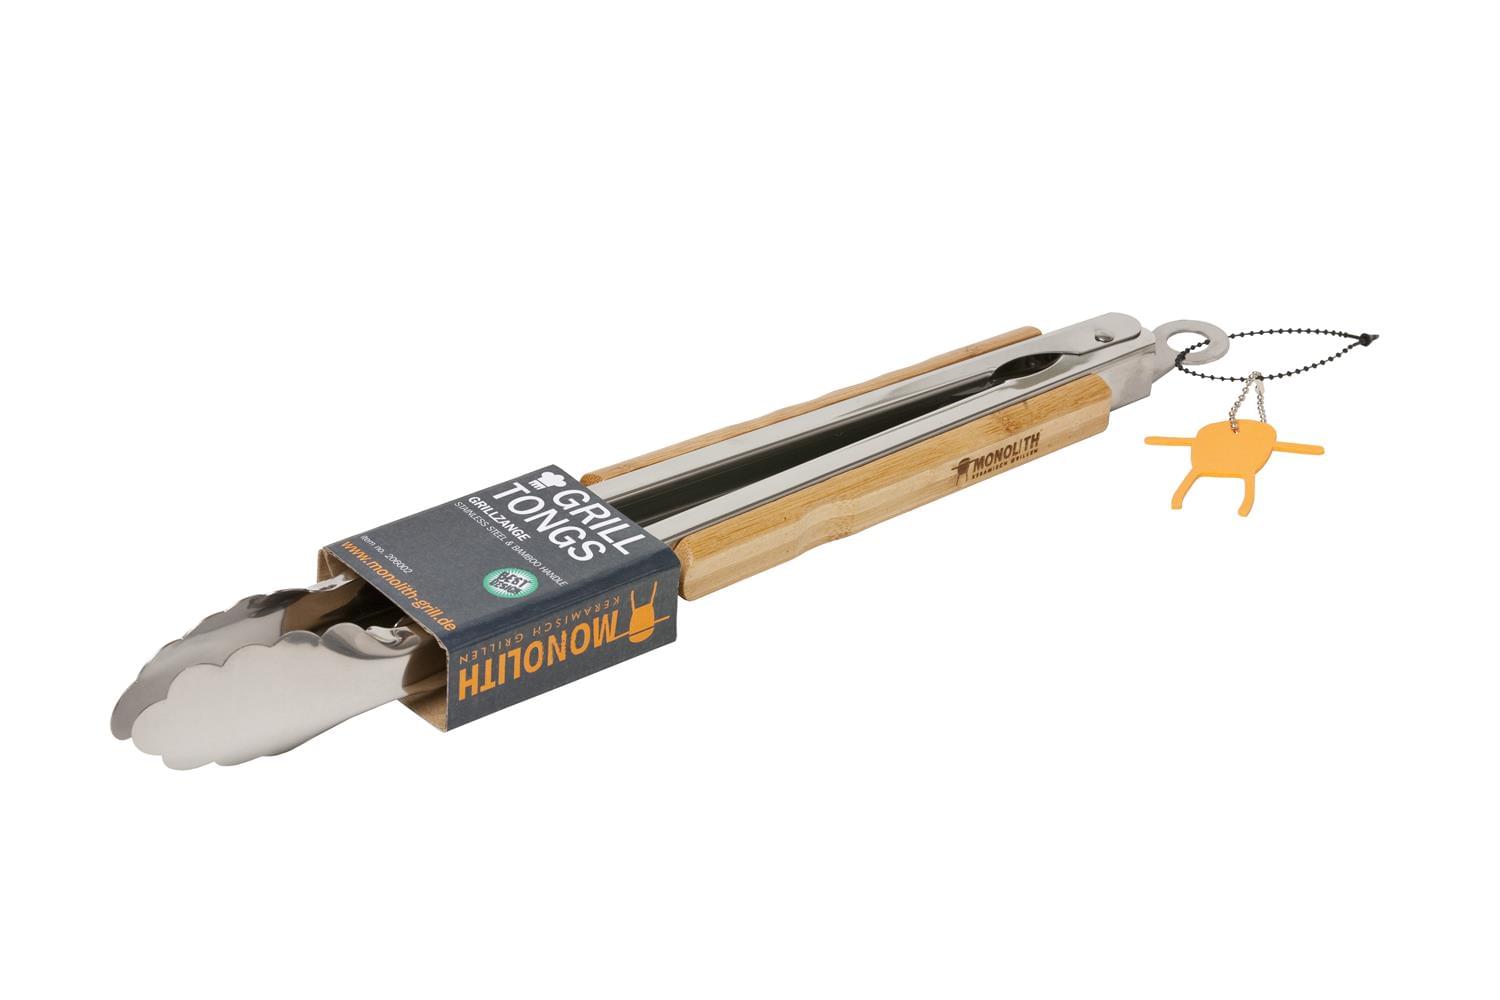 Barbecue tongs